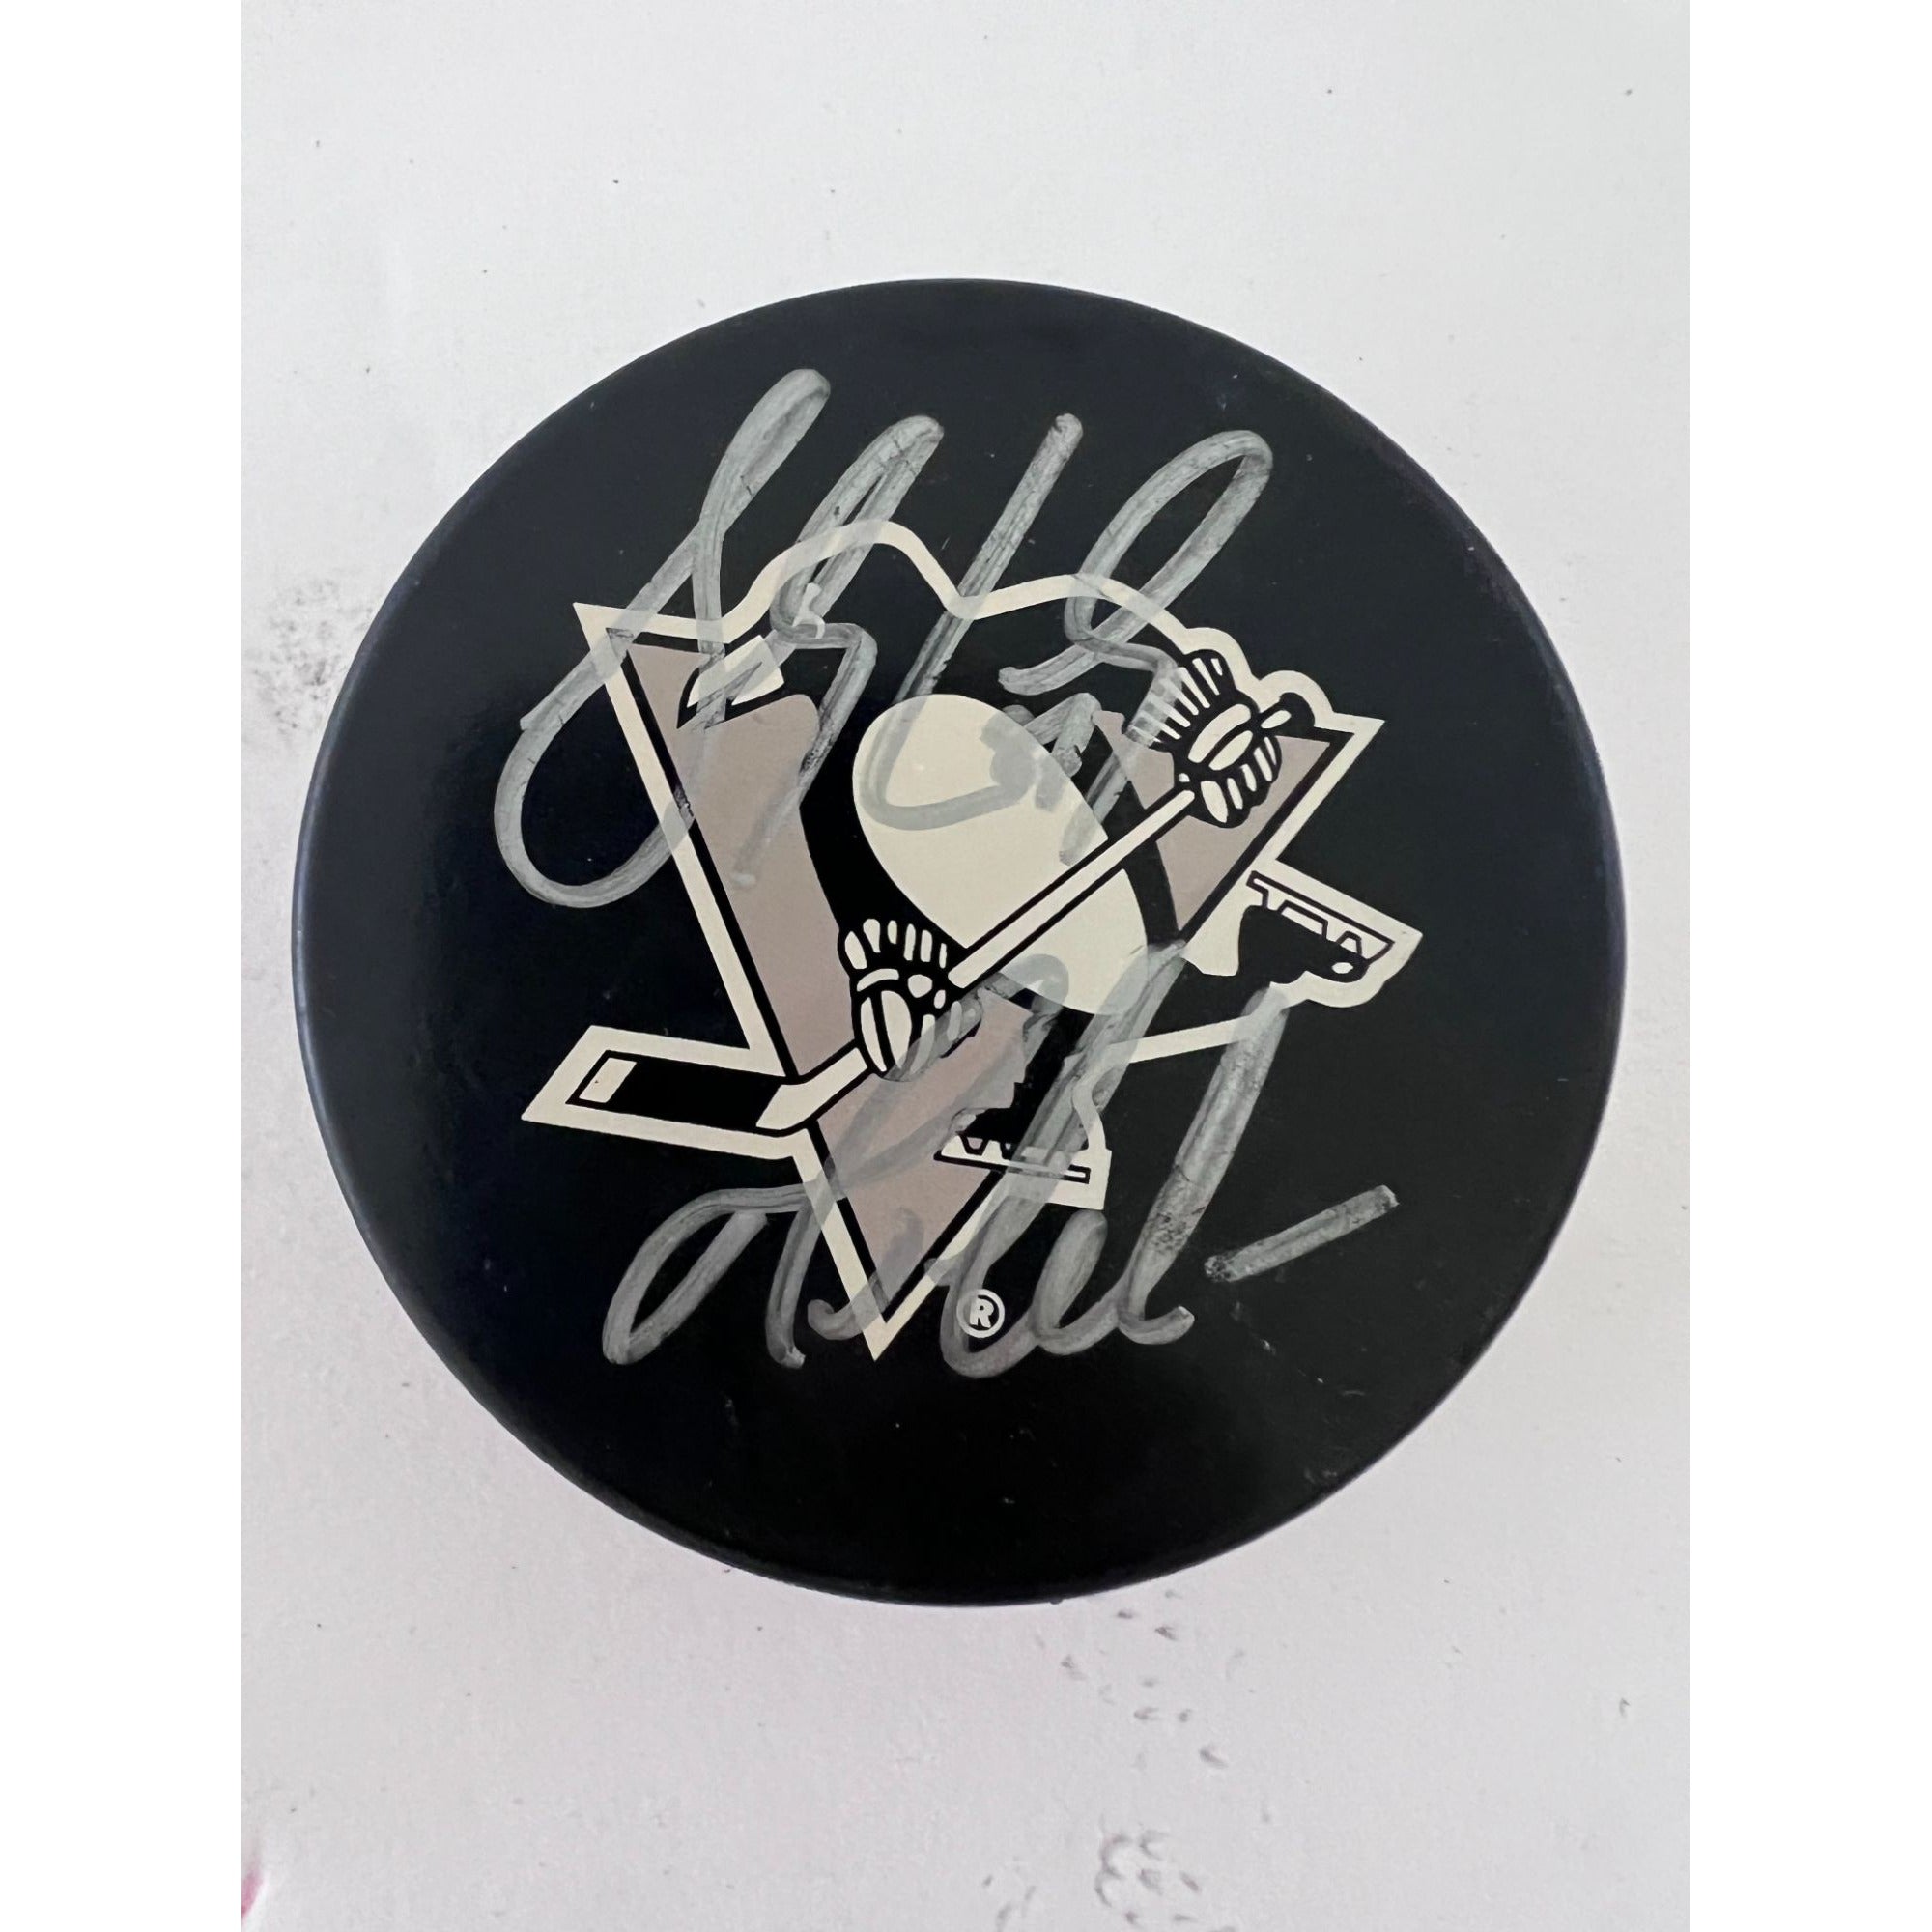 Pittsburgh Penguins Mario Lemieux Sidney Crosby official hockey puck signed with proof